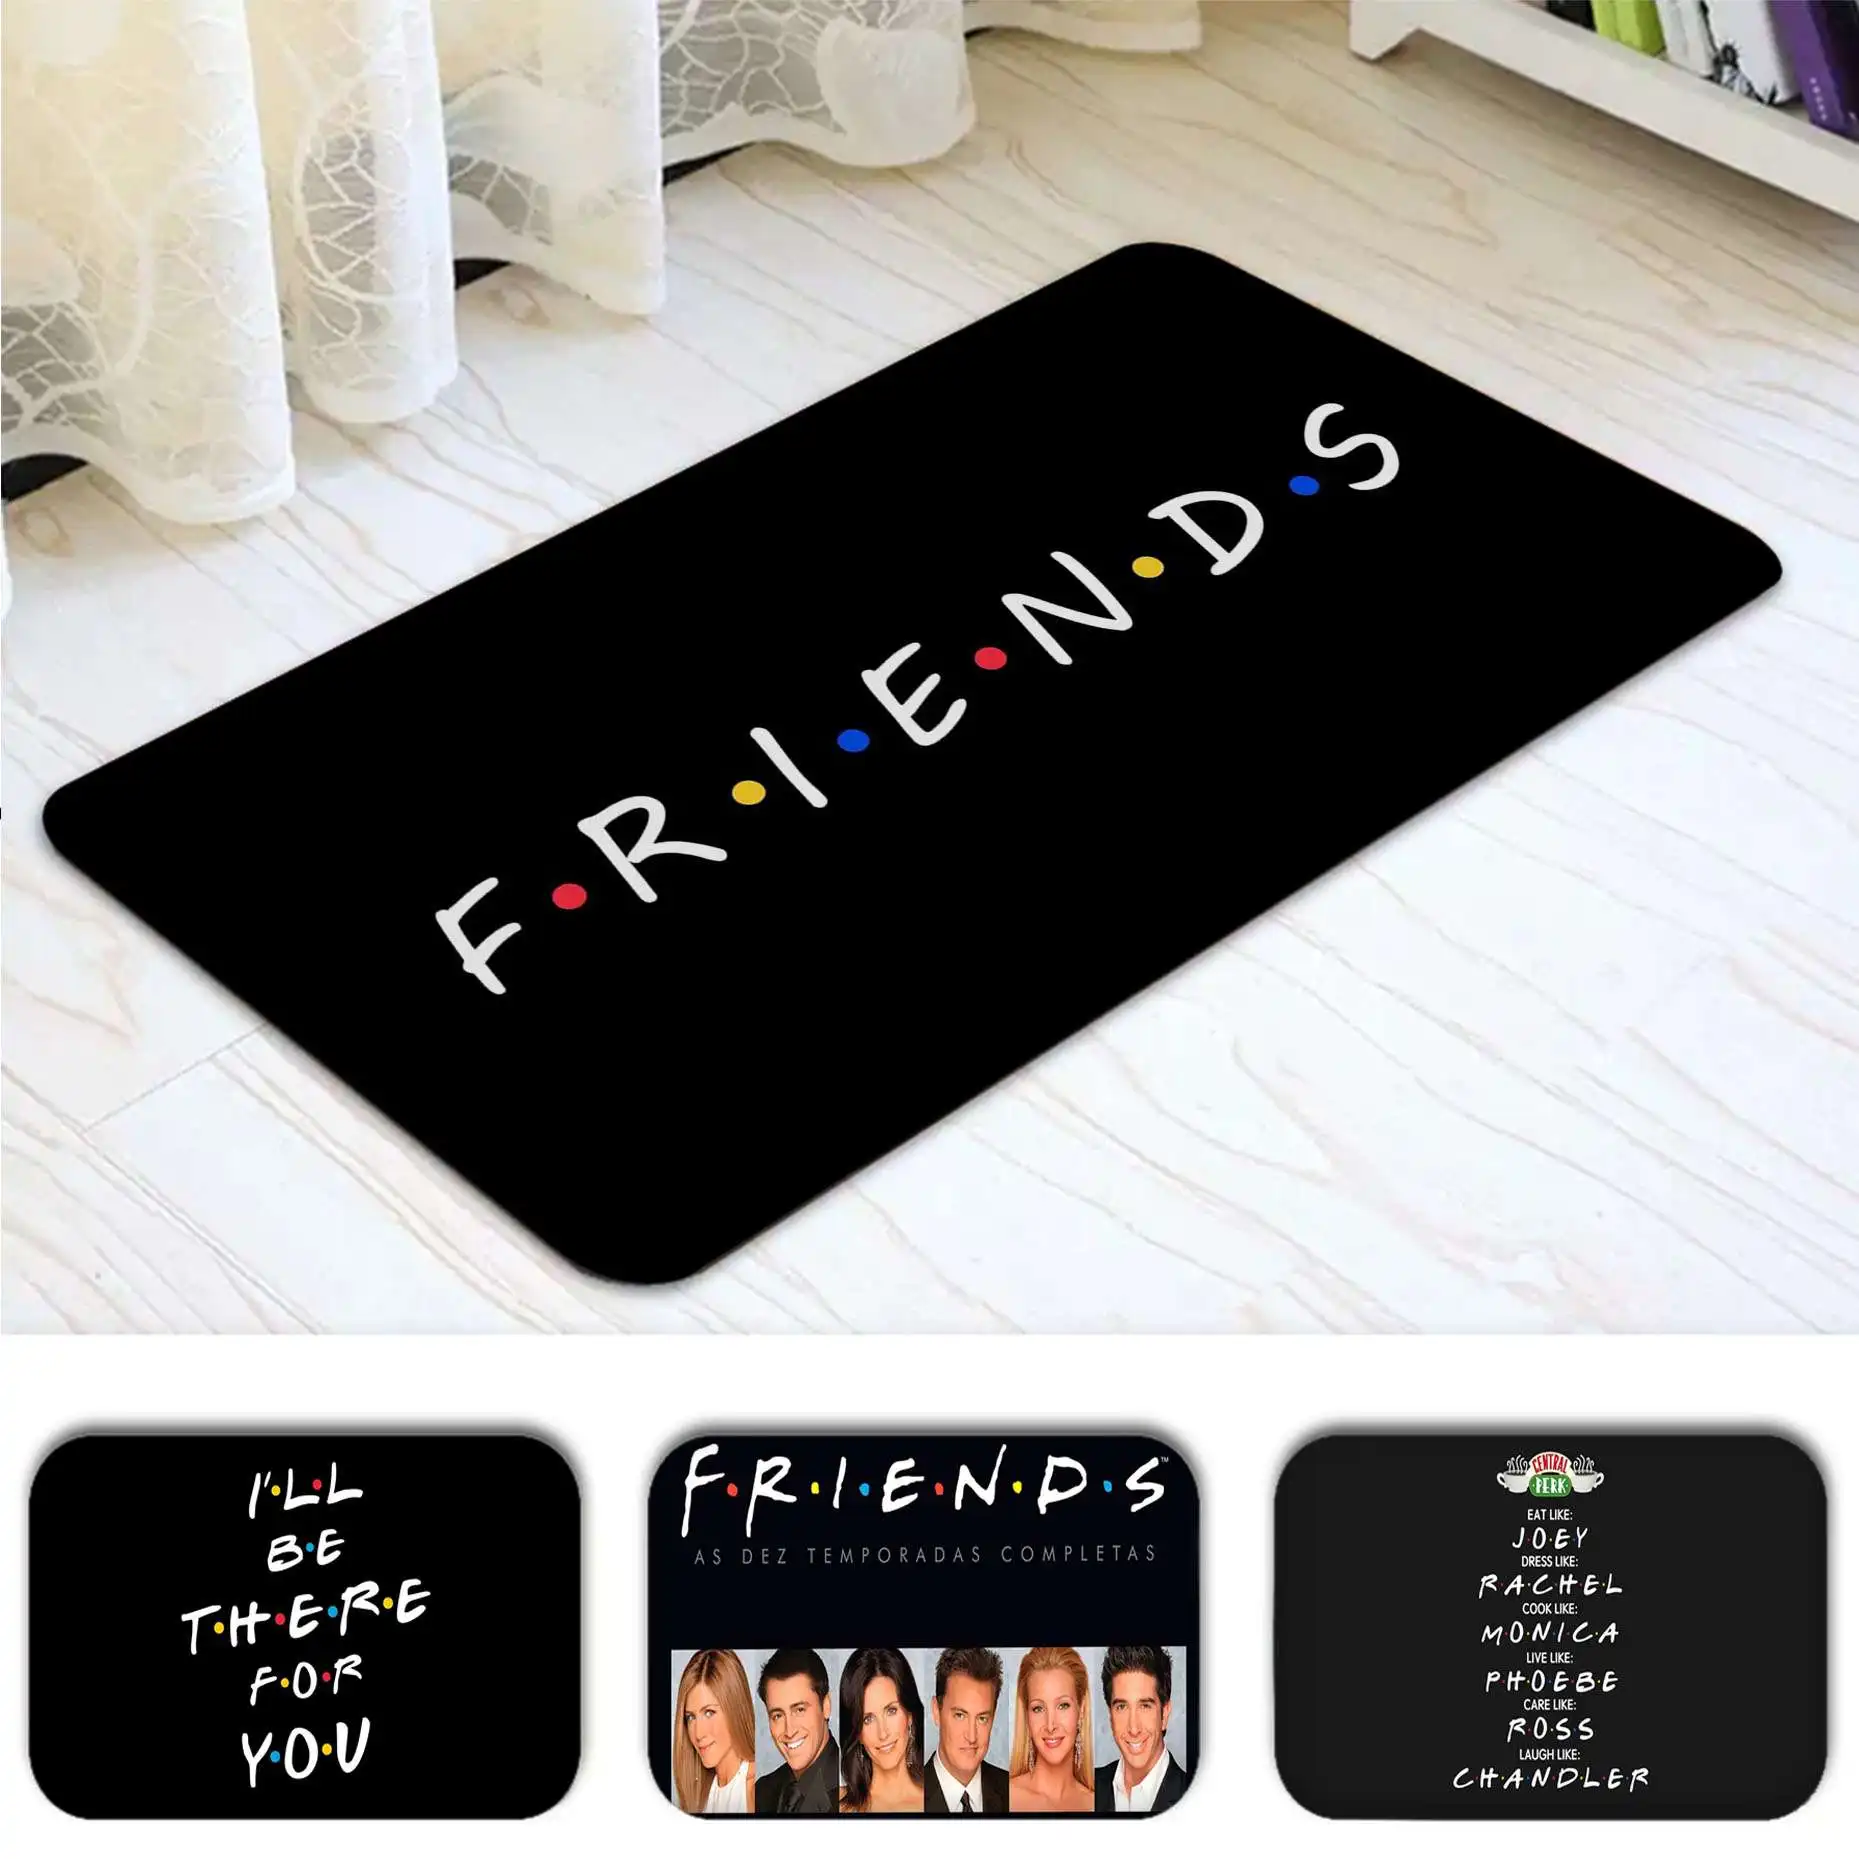 

Friends TV Show Funny Quotes Printed Printed Flannel Floor Mat Bathroom Decor Carpet Non-Slip For Living Room Kitchen Doormat